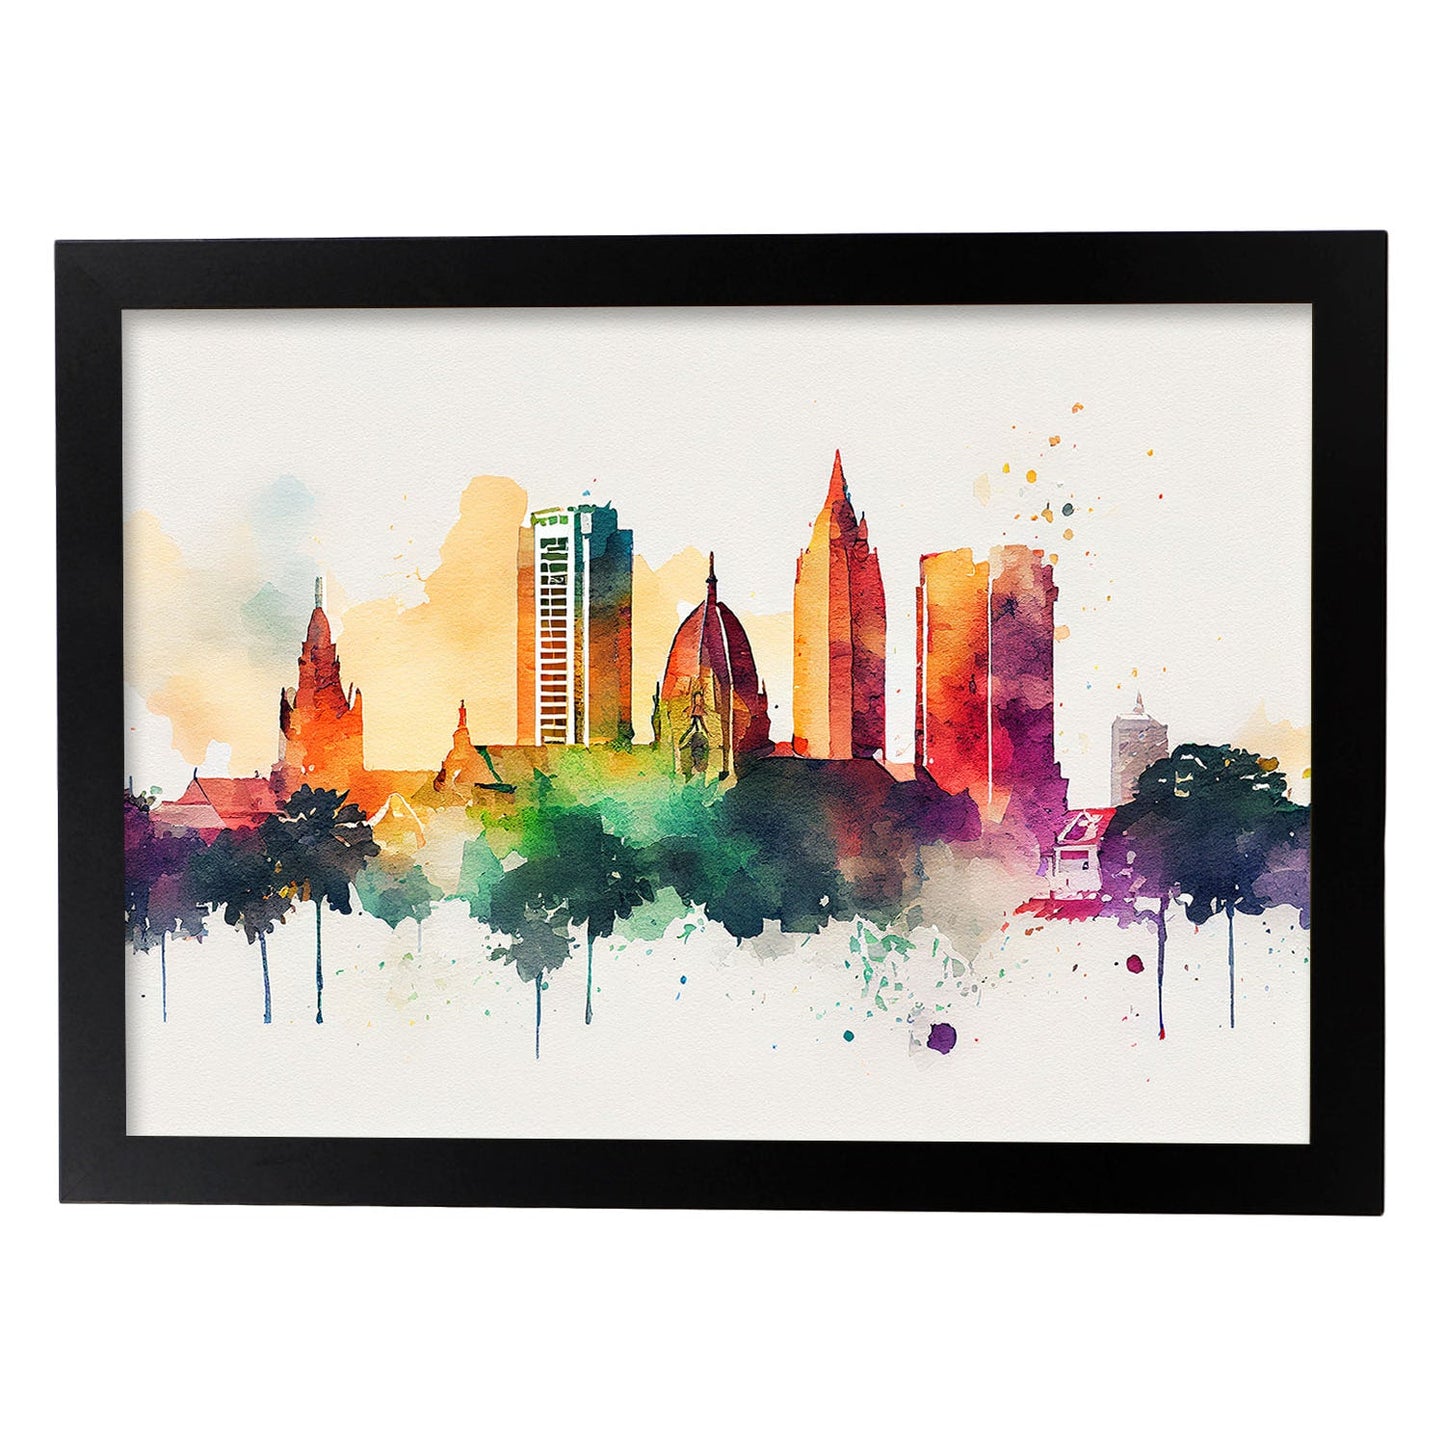 Nacnic watercolor of a skyline of the city of Colombo. Aesthetic Wall Art Prints for Bedroom or Living Room Design.